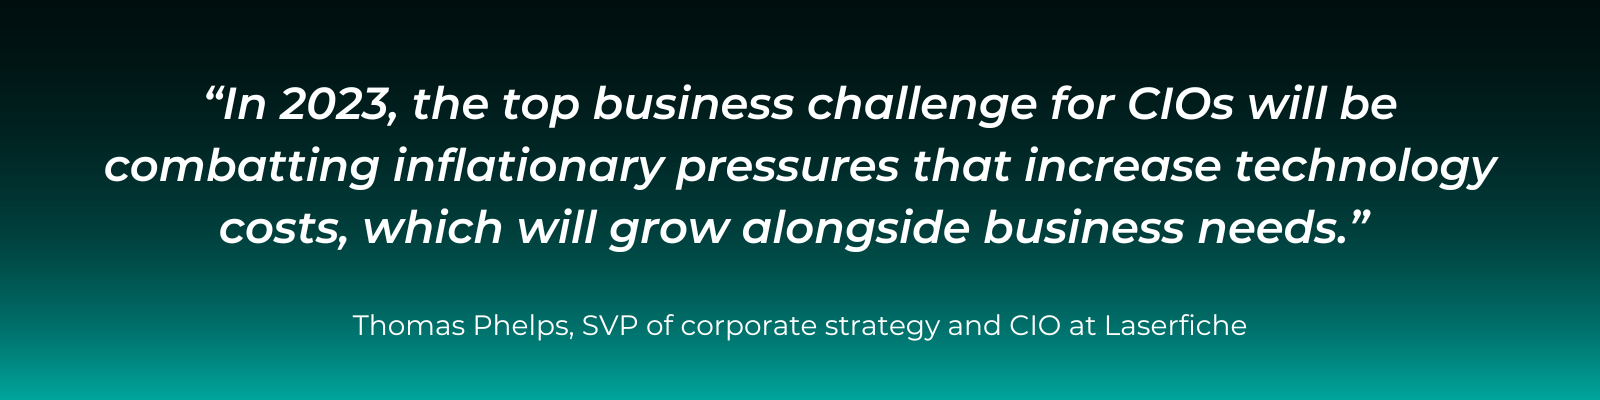 "“In 2023, the top business challenge for CIOs will be combatting inflationary pressures that increase technology costs, which will grow alongside business needs.”  - Thomas Phelps, SVP of corporate strategy and CIO at Laserfiche